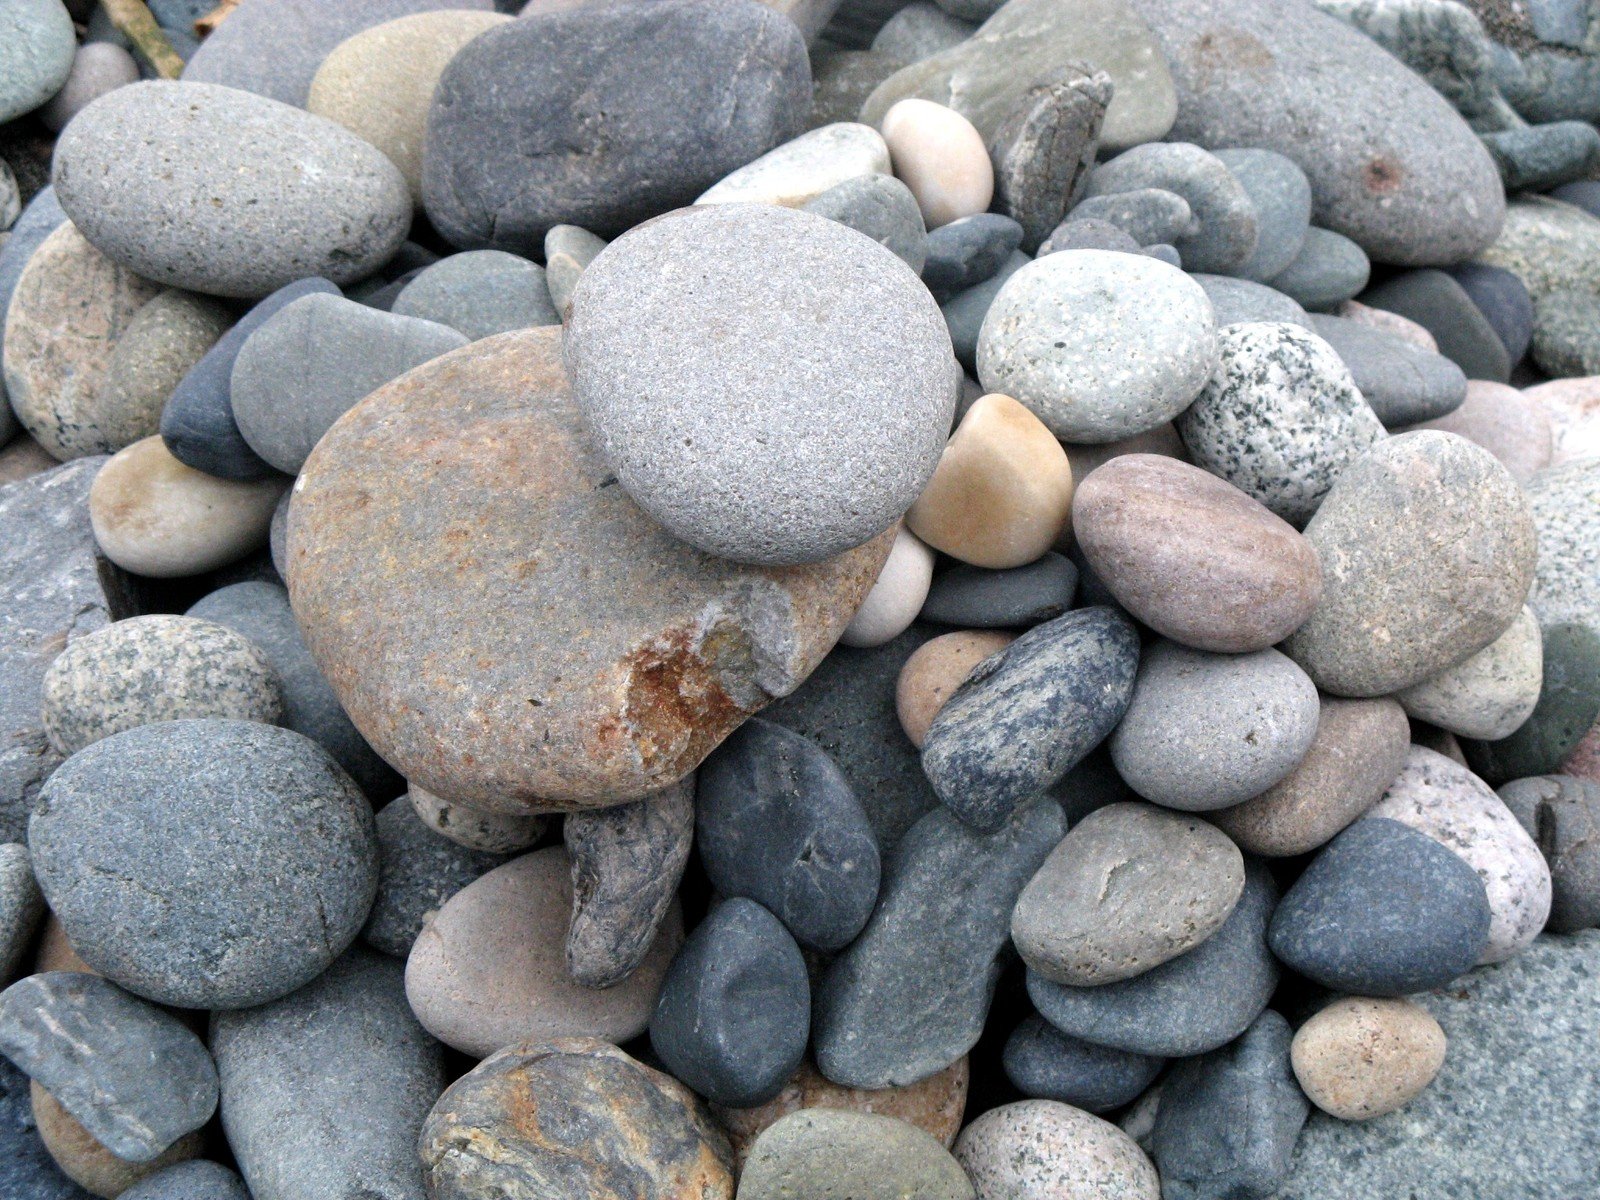 several different rocks are stacked up in a pile